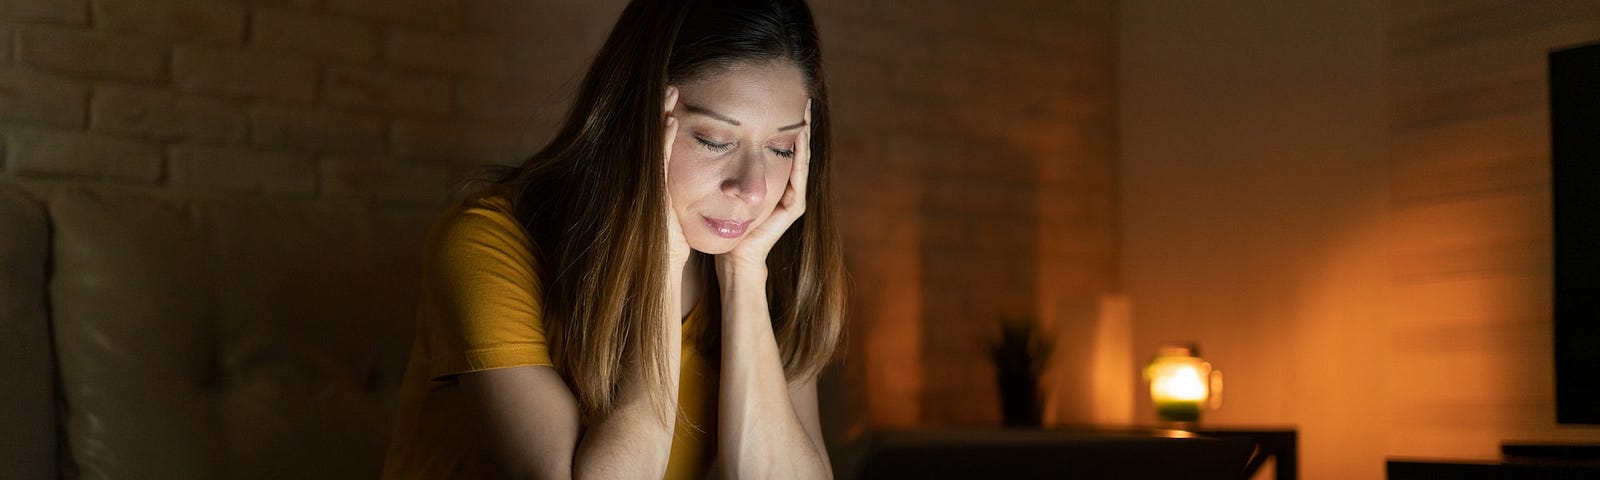 A sad-looking woman sitting at a laptop in the dark.